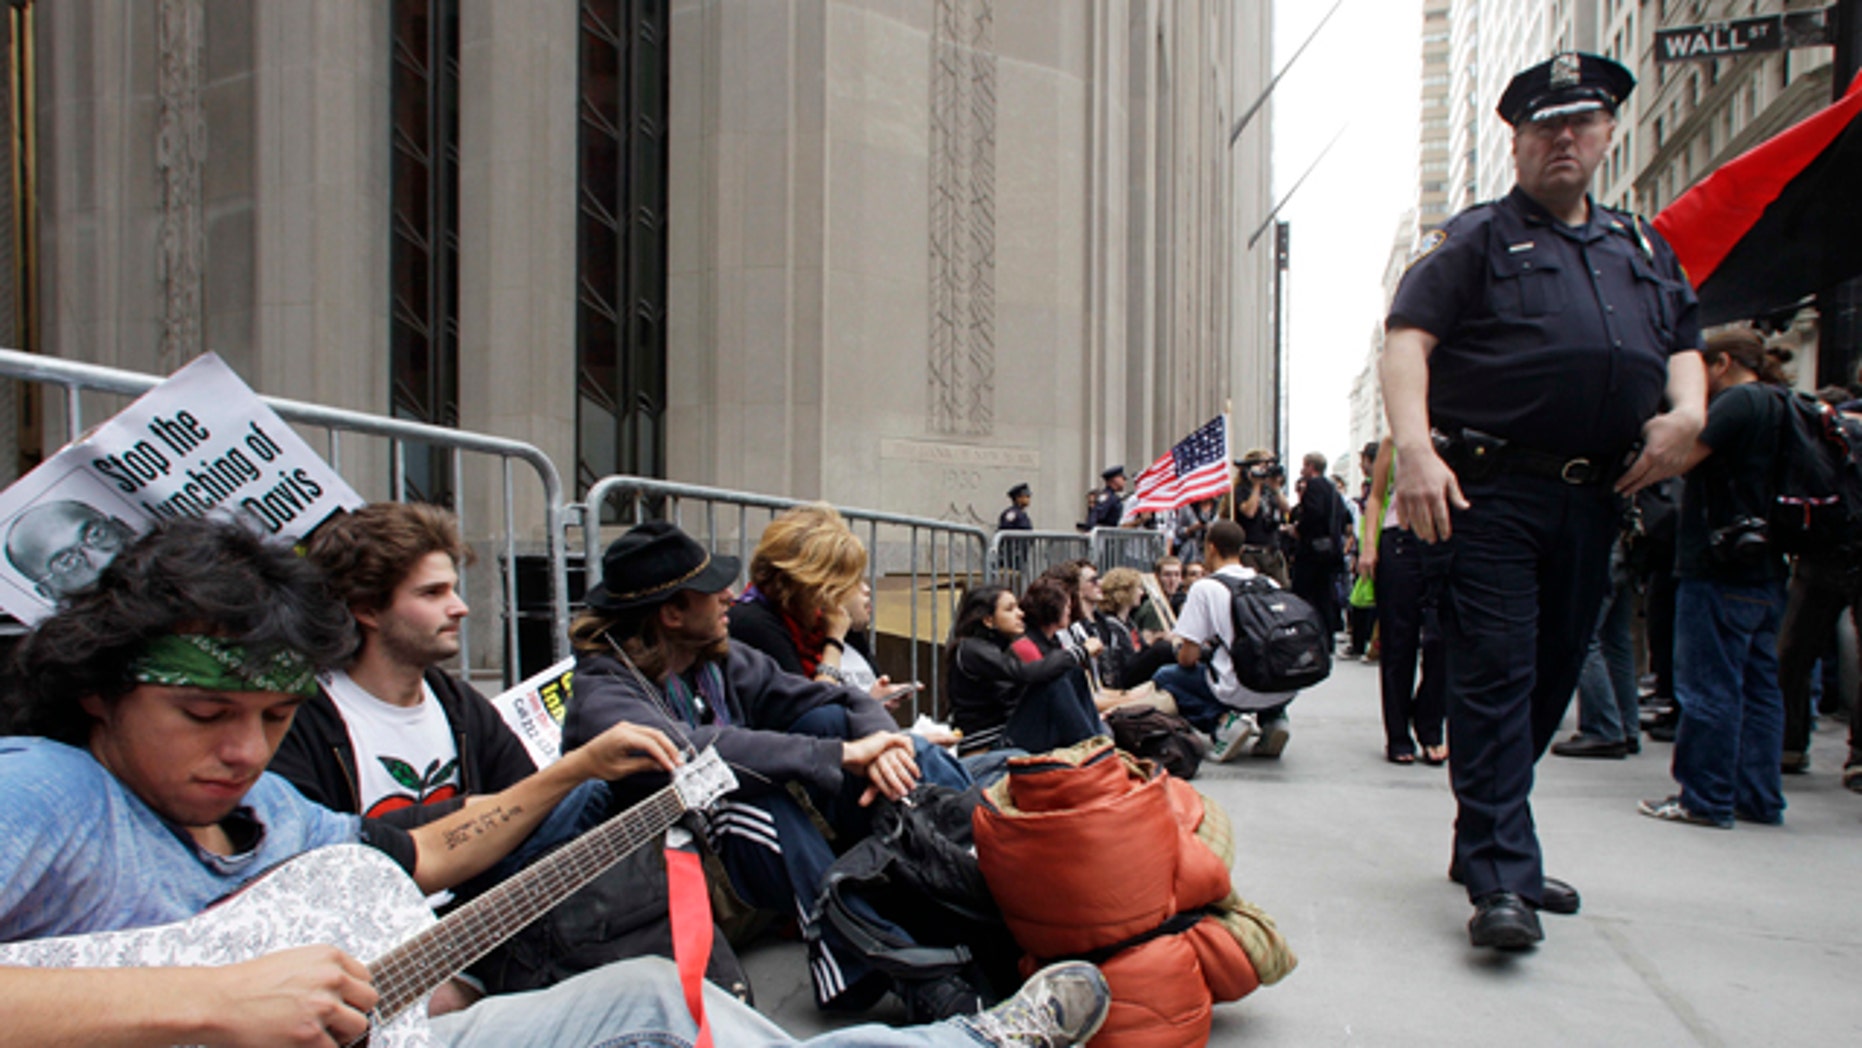 Demonstrators 'Occupy Wall Street' to Protest Influence of Money on U.S